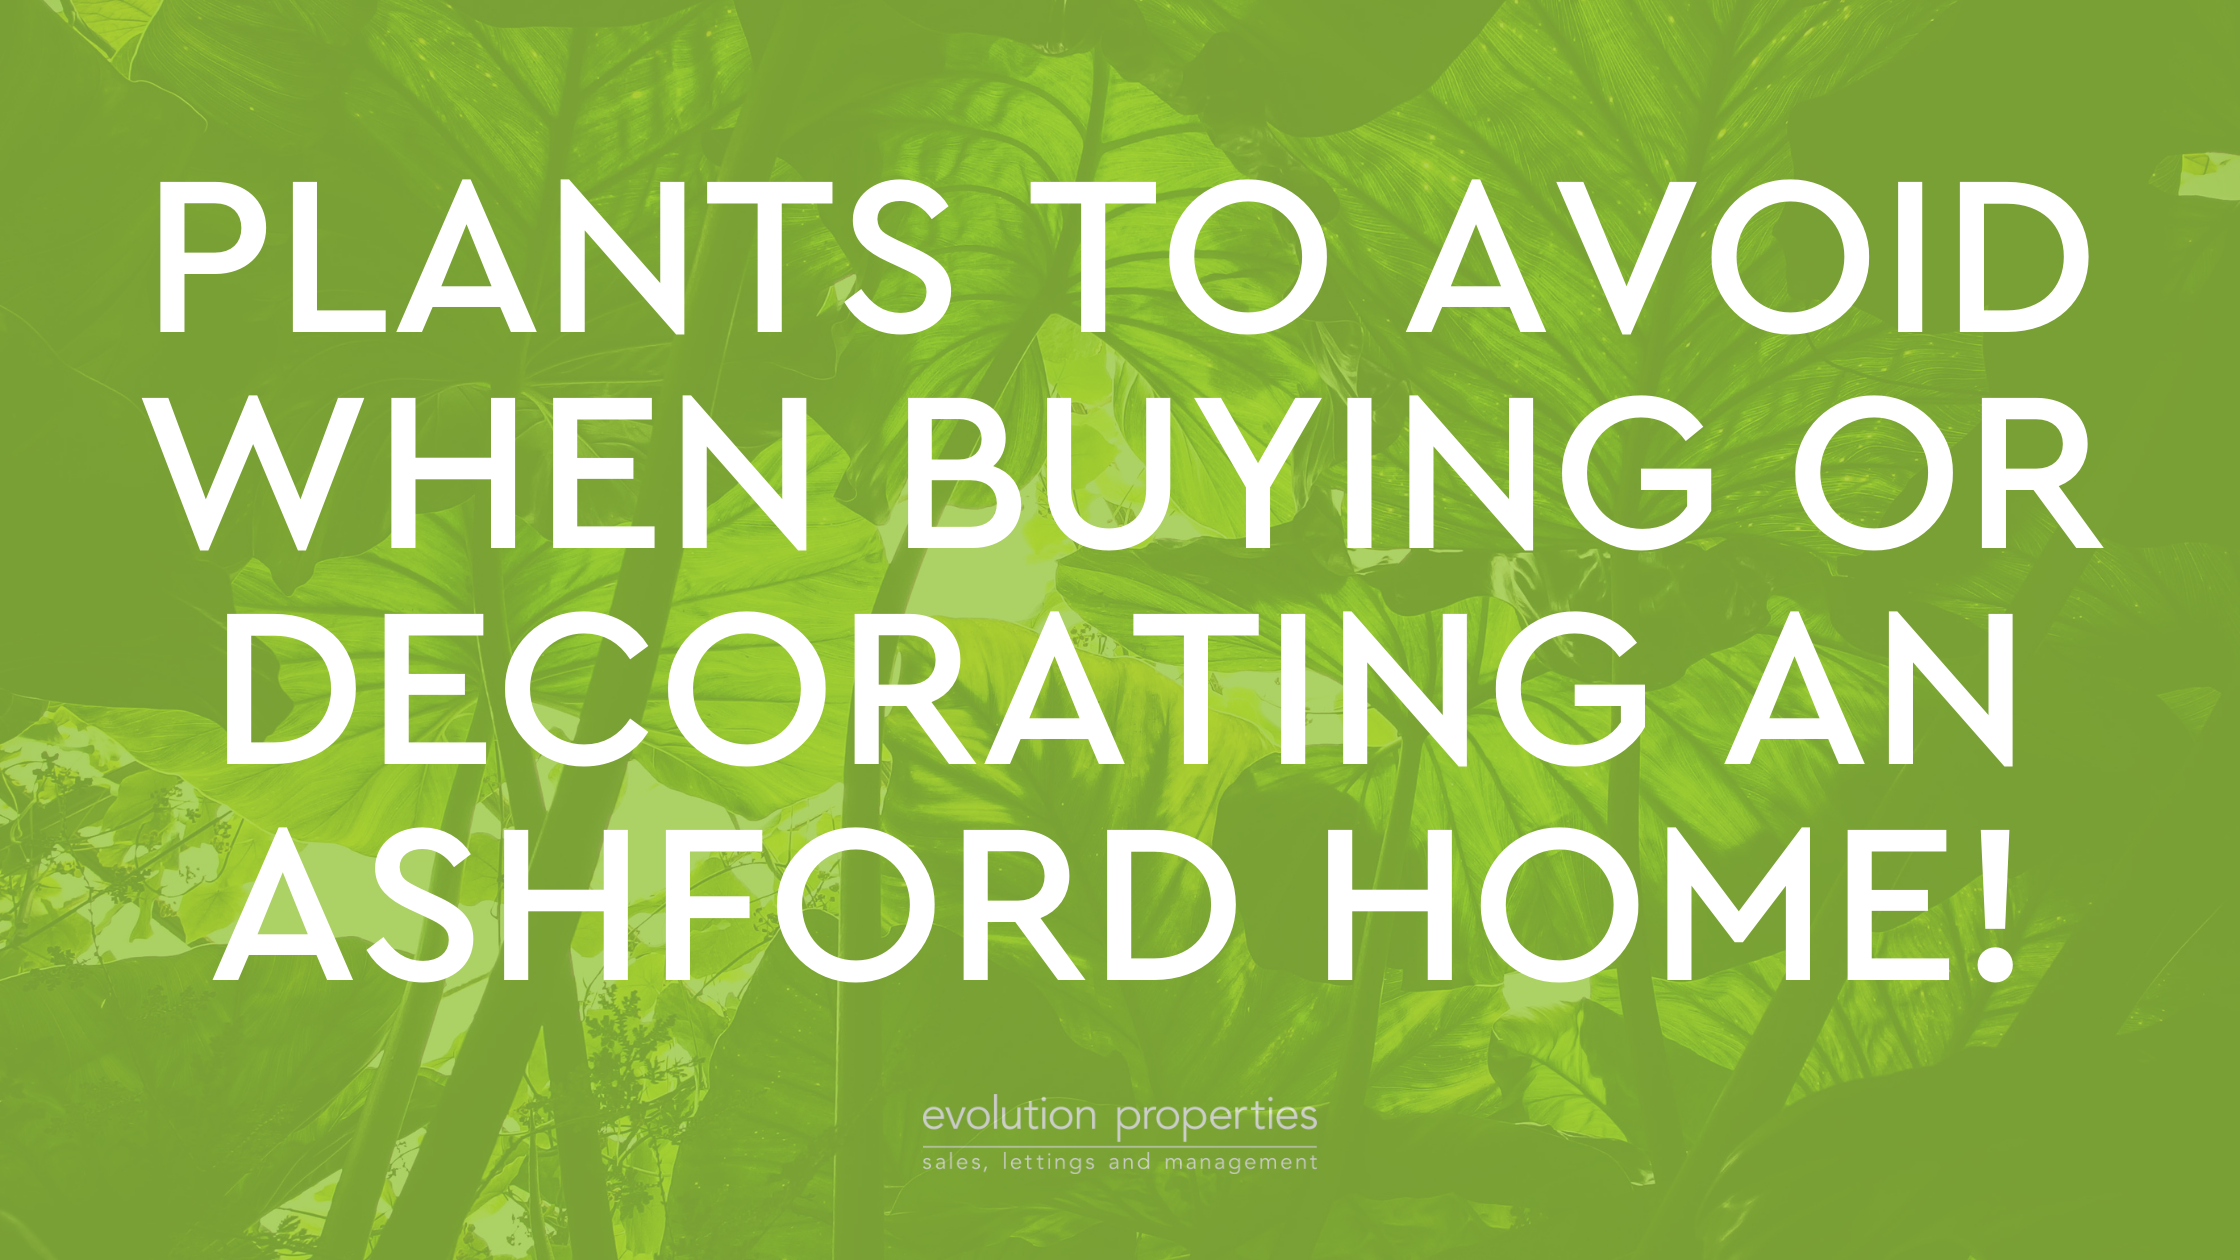 Plants to avoid when buying or decorating a home